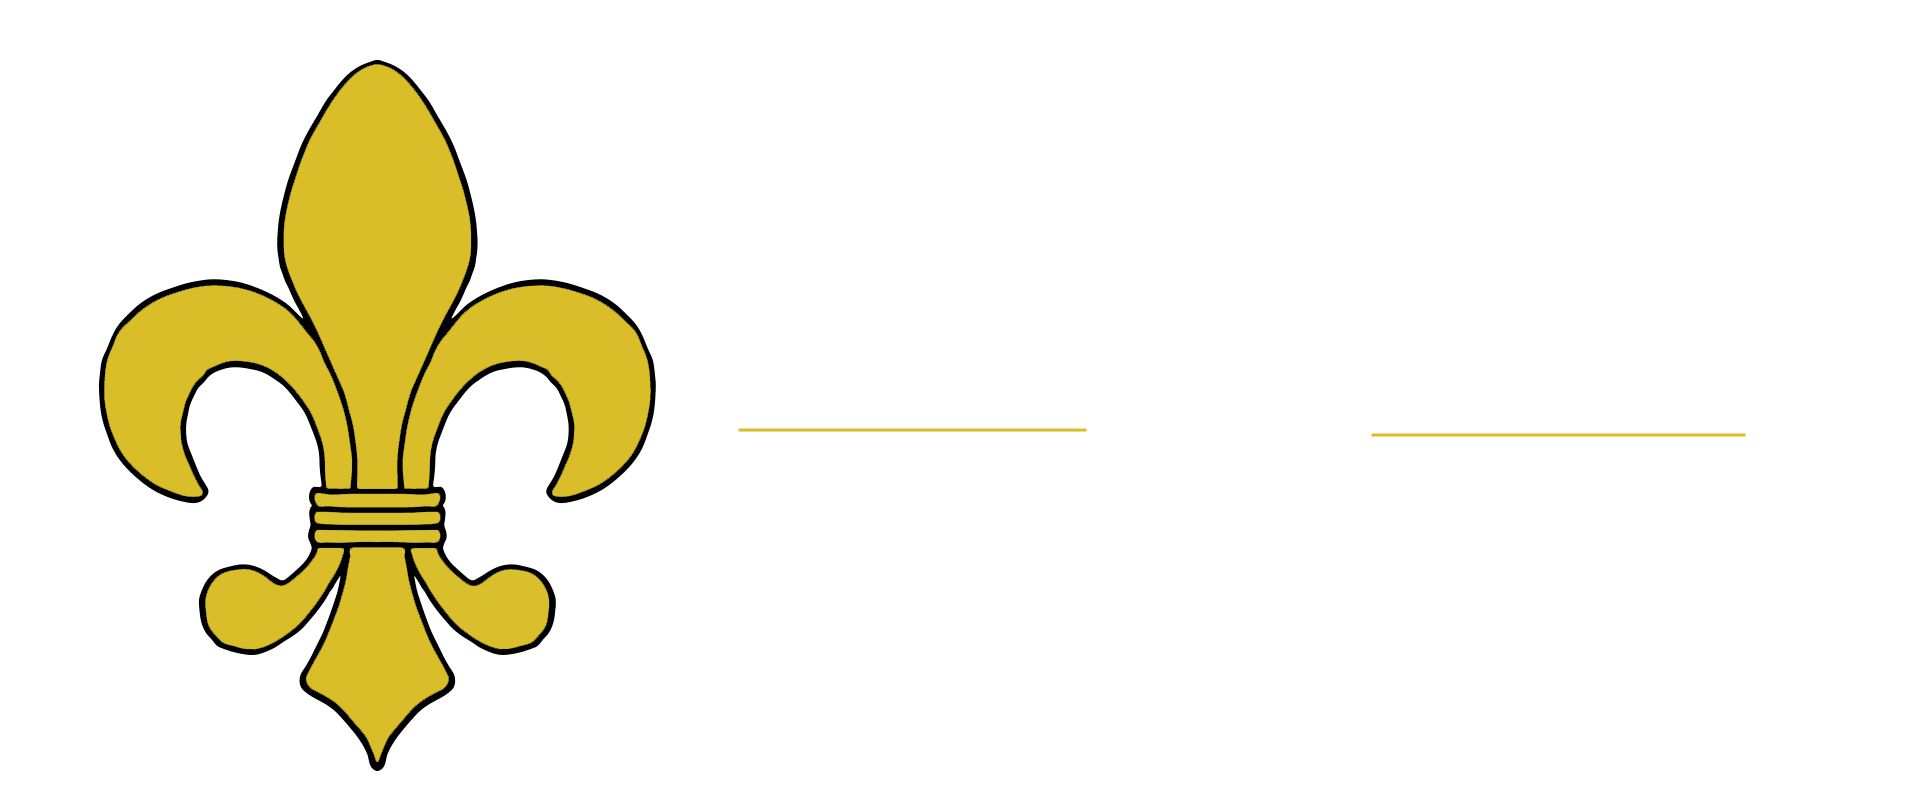 David Holton for Jefferson county attorney